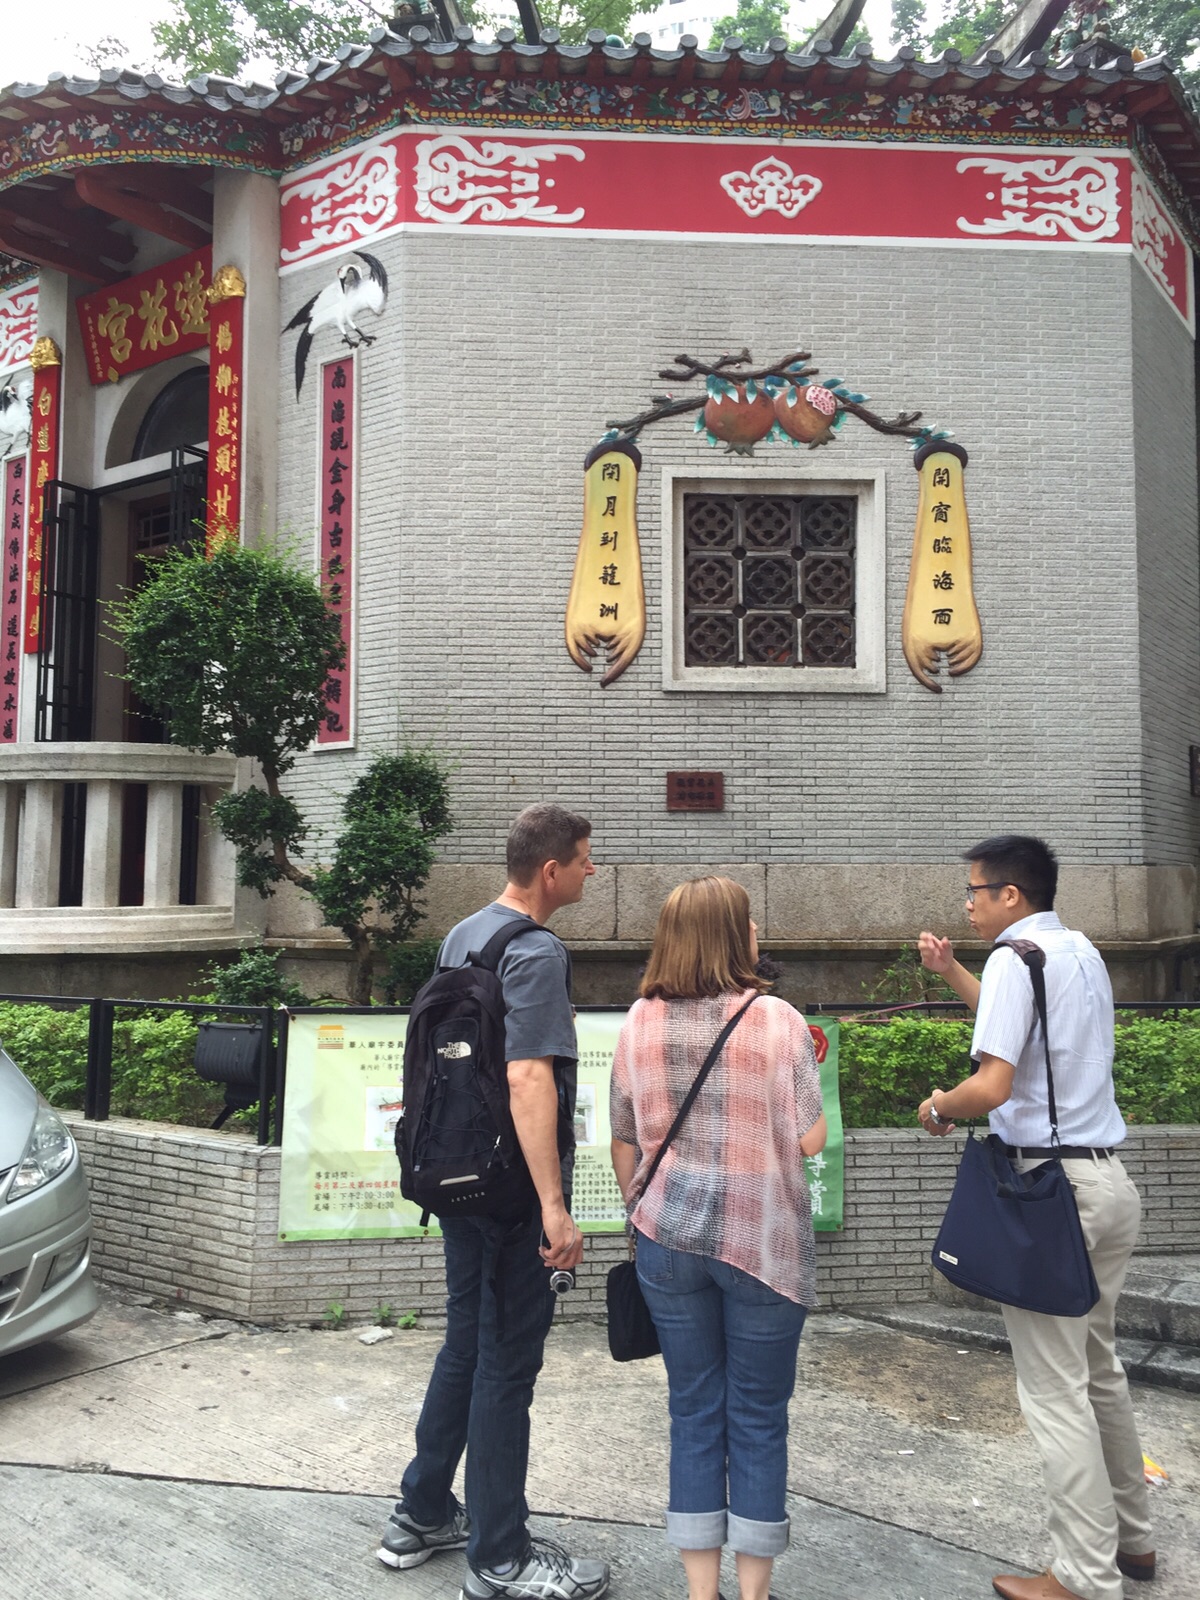 Frank the tour guide is making tour commentary for Lin Fa Kung Temple for Mr and Mrs Miller